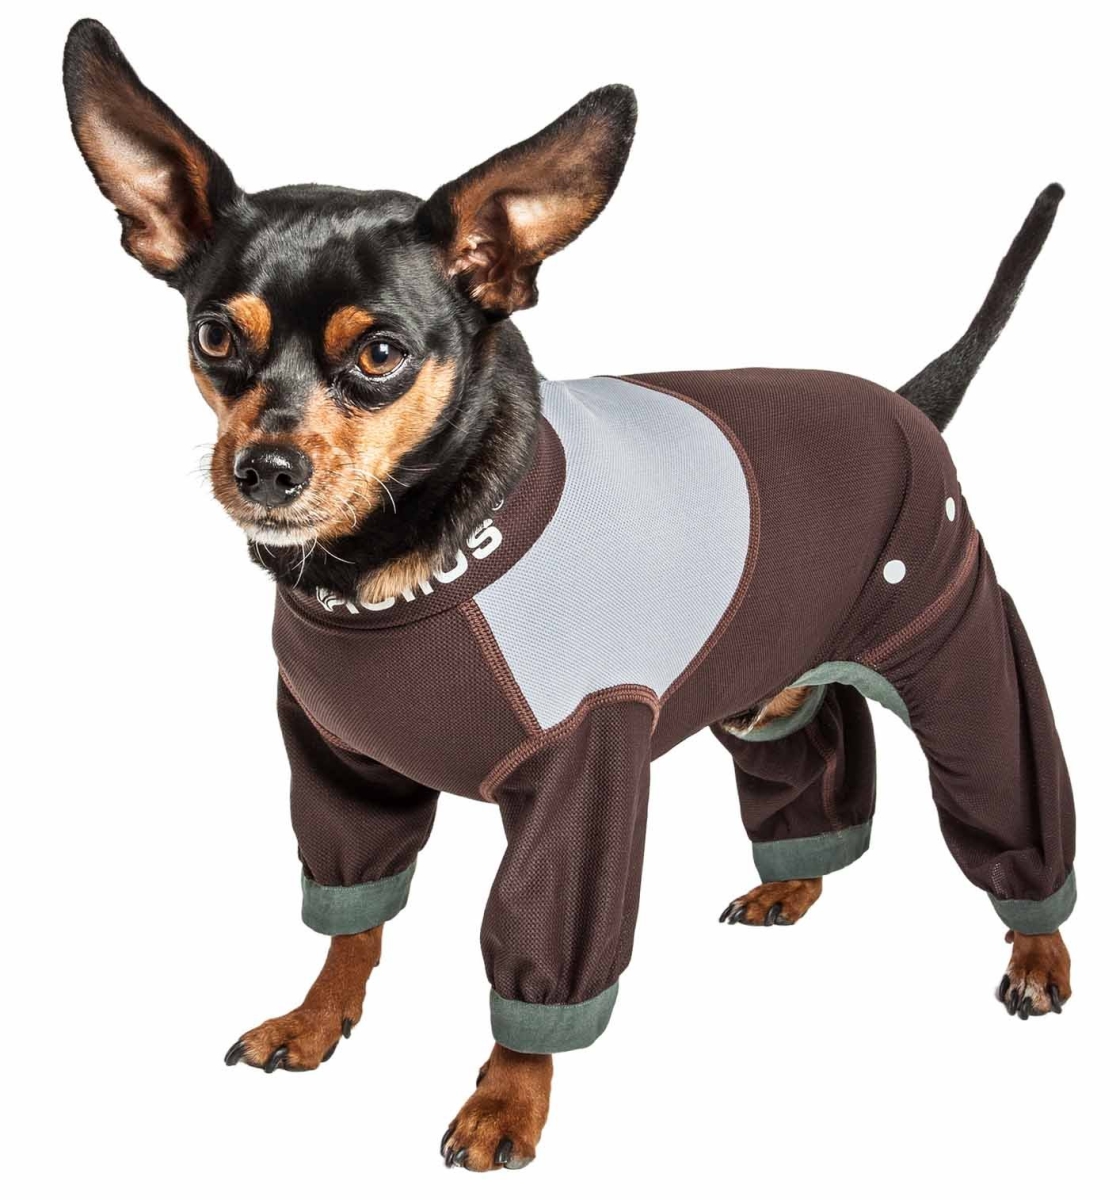 Yghl9brlg Tail Runner 4-way-stretch Breathable Full Bodied Performance Dog Track Suit - Brown & Grey, Large